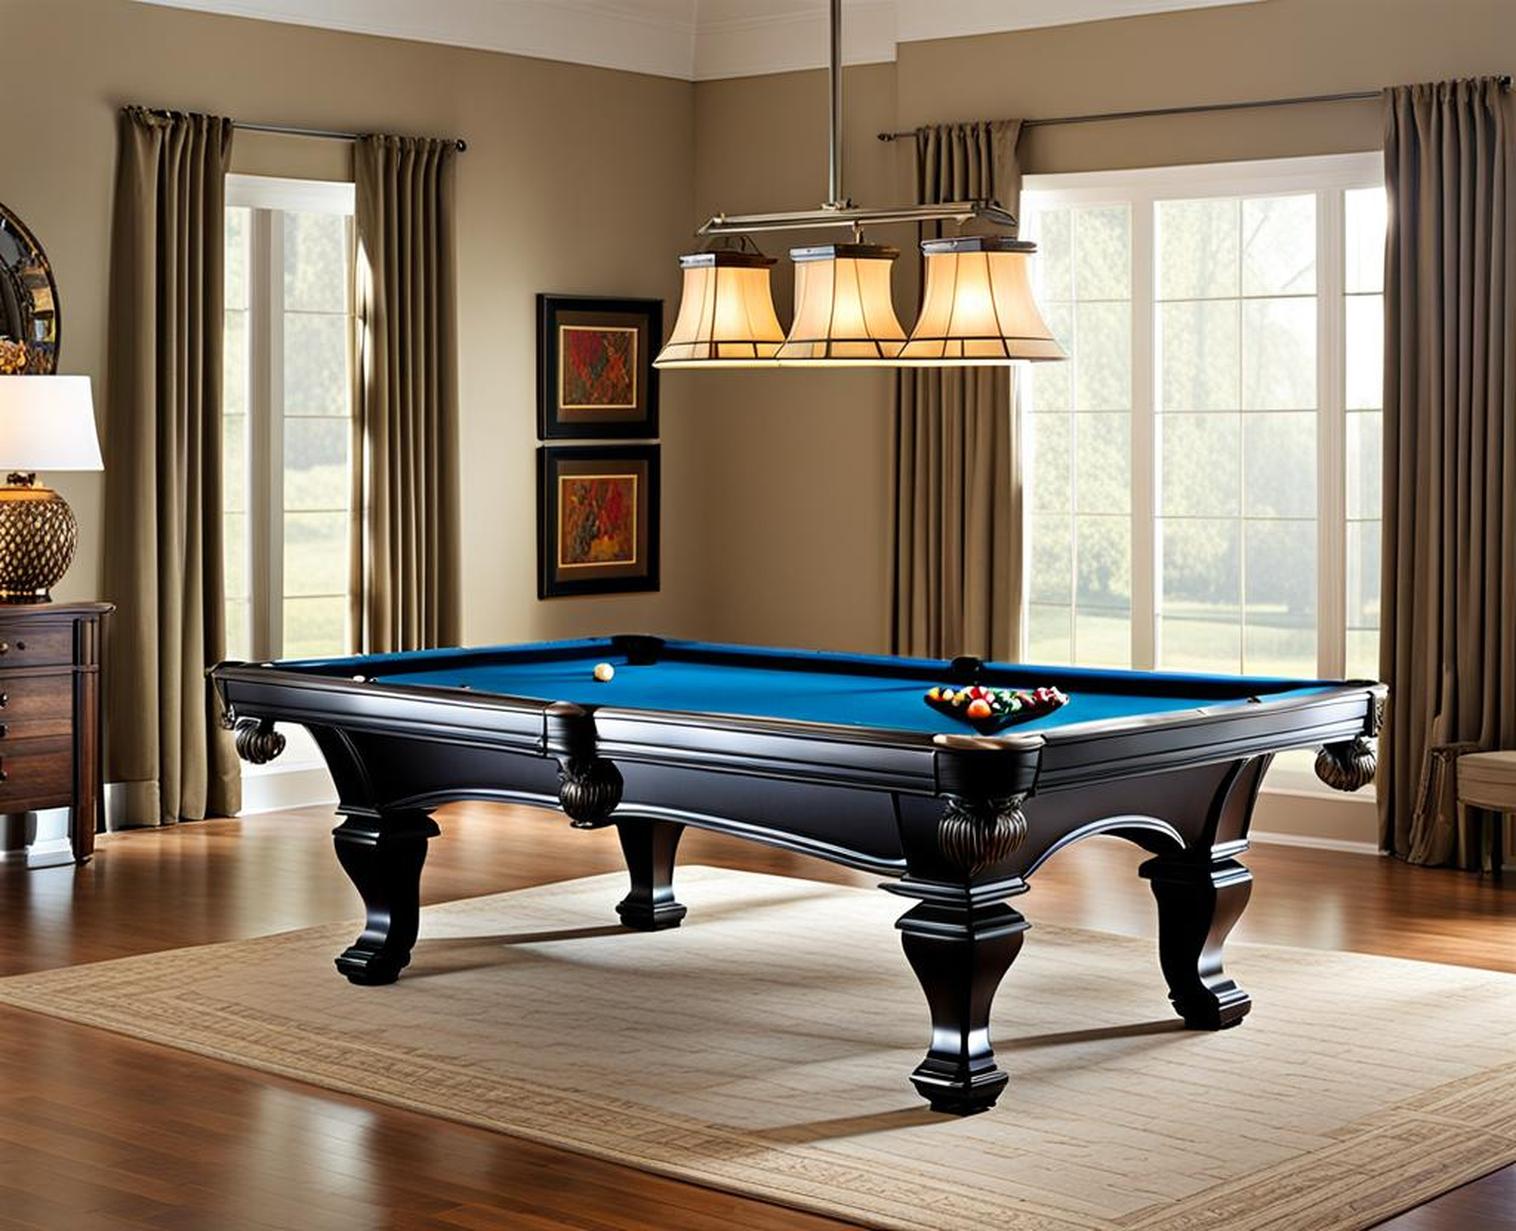 what size is a regulation pool table